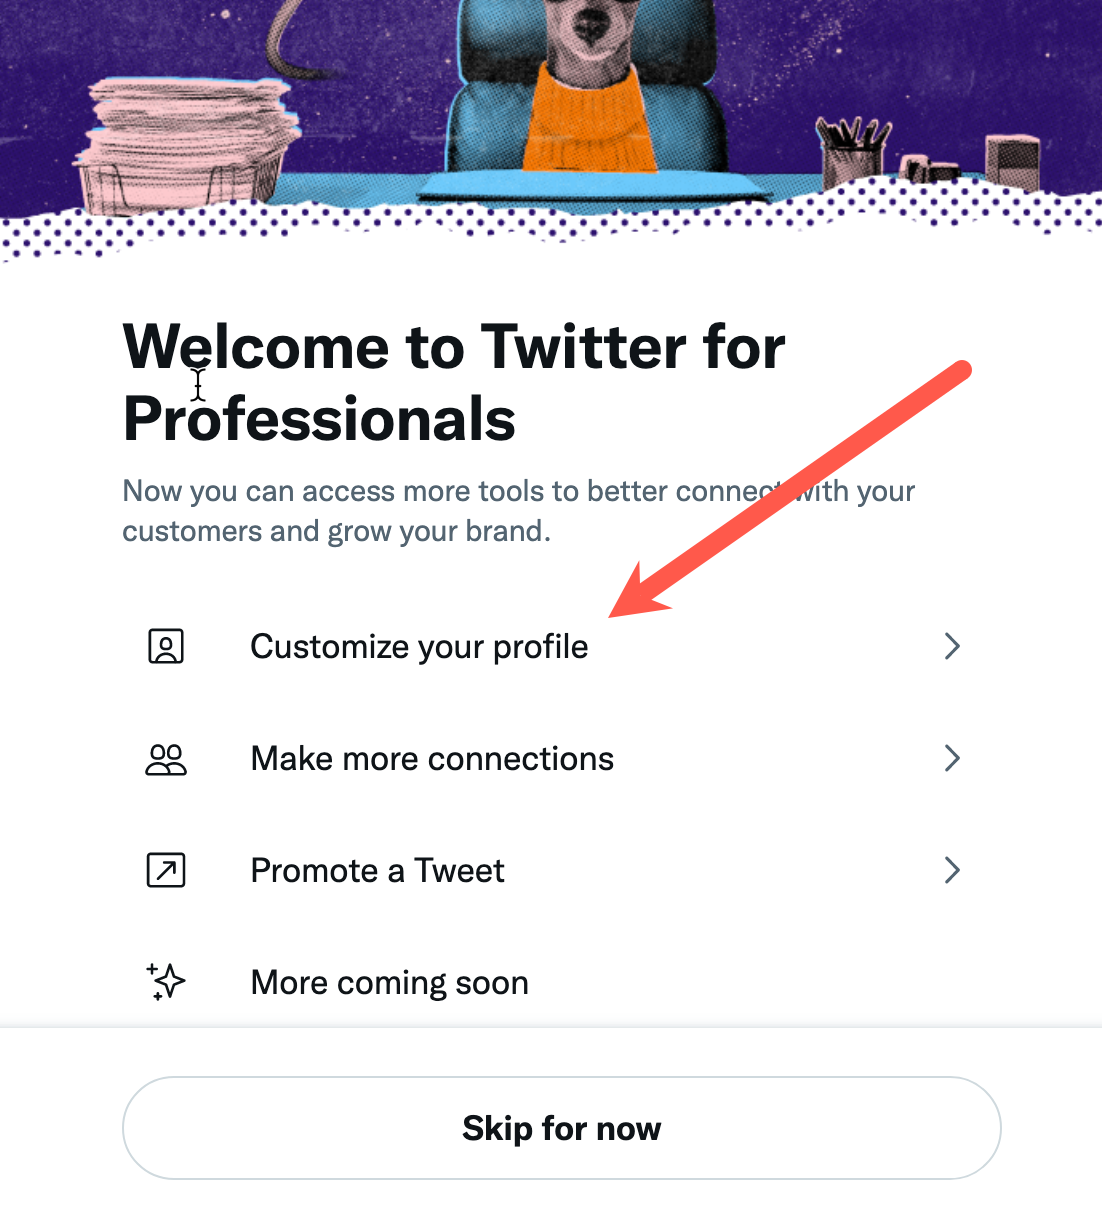 Customize your profile to enhance Twitter's business features